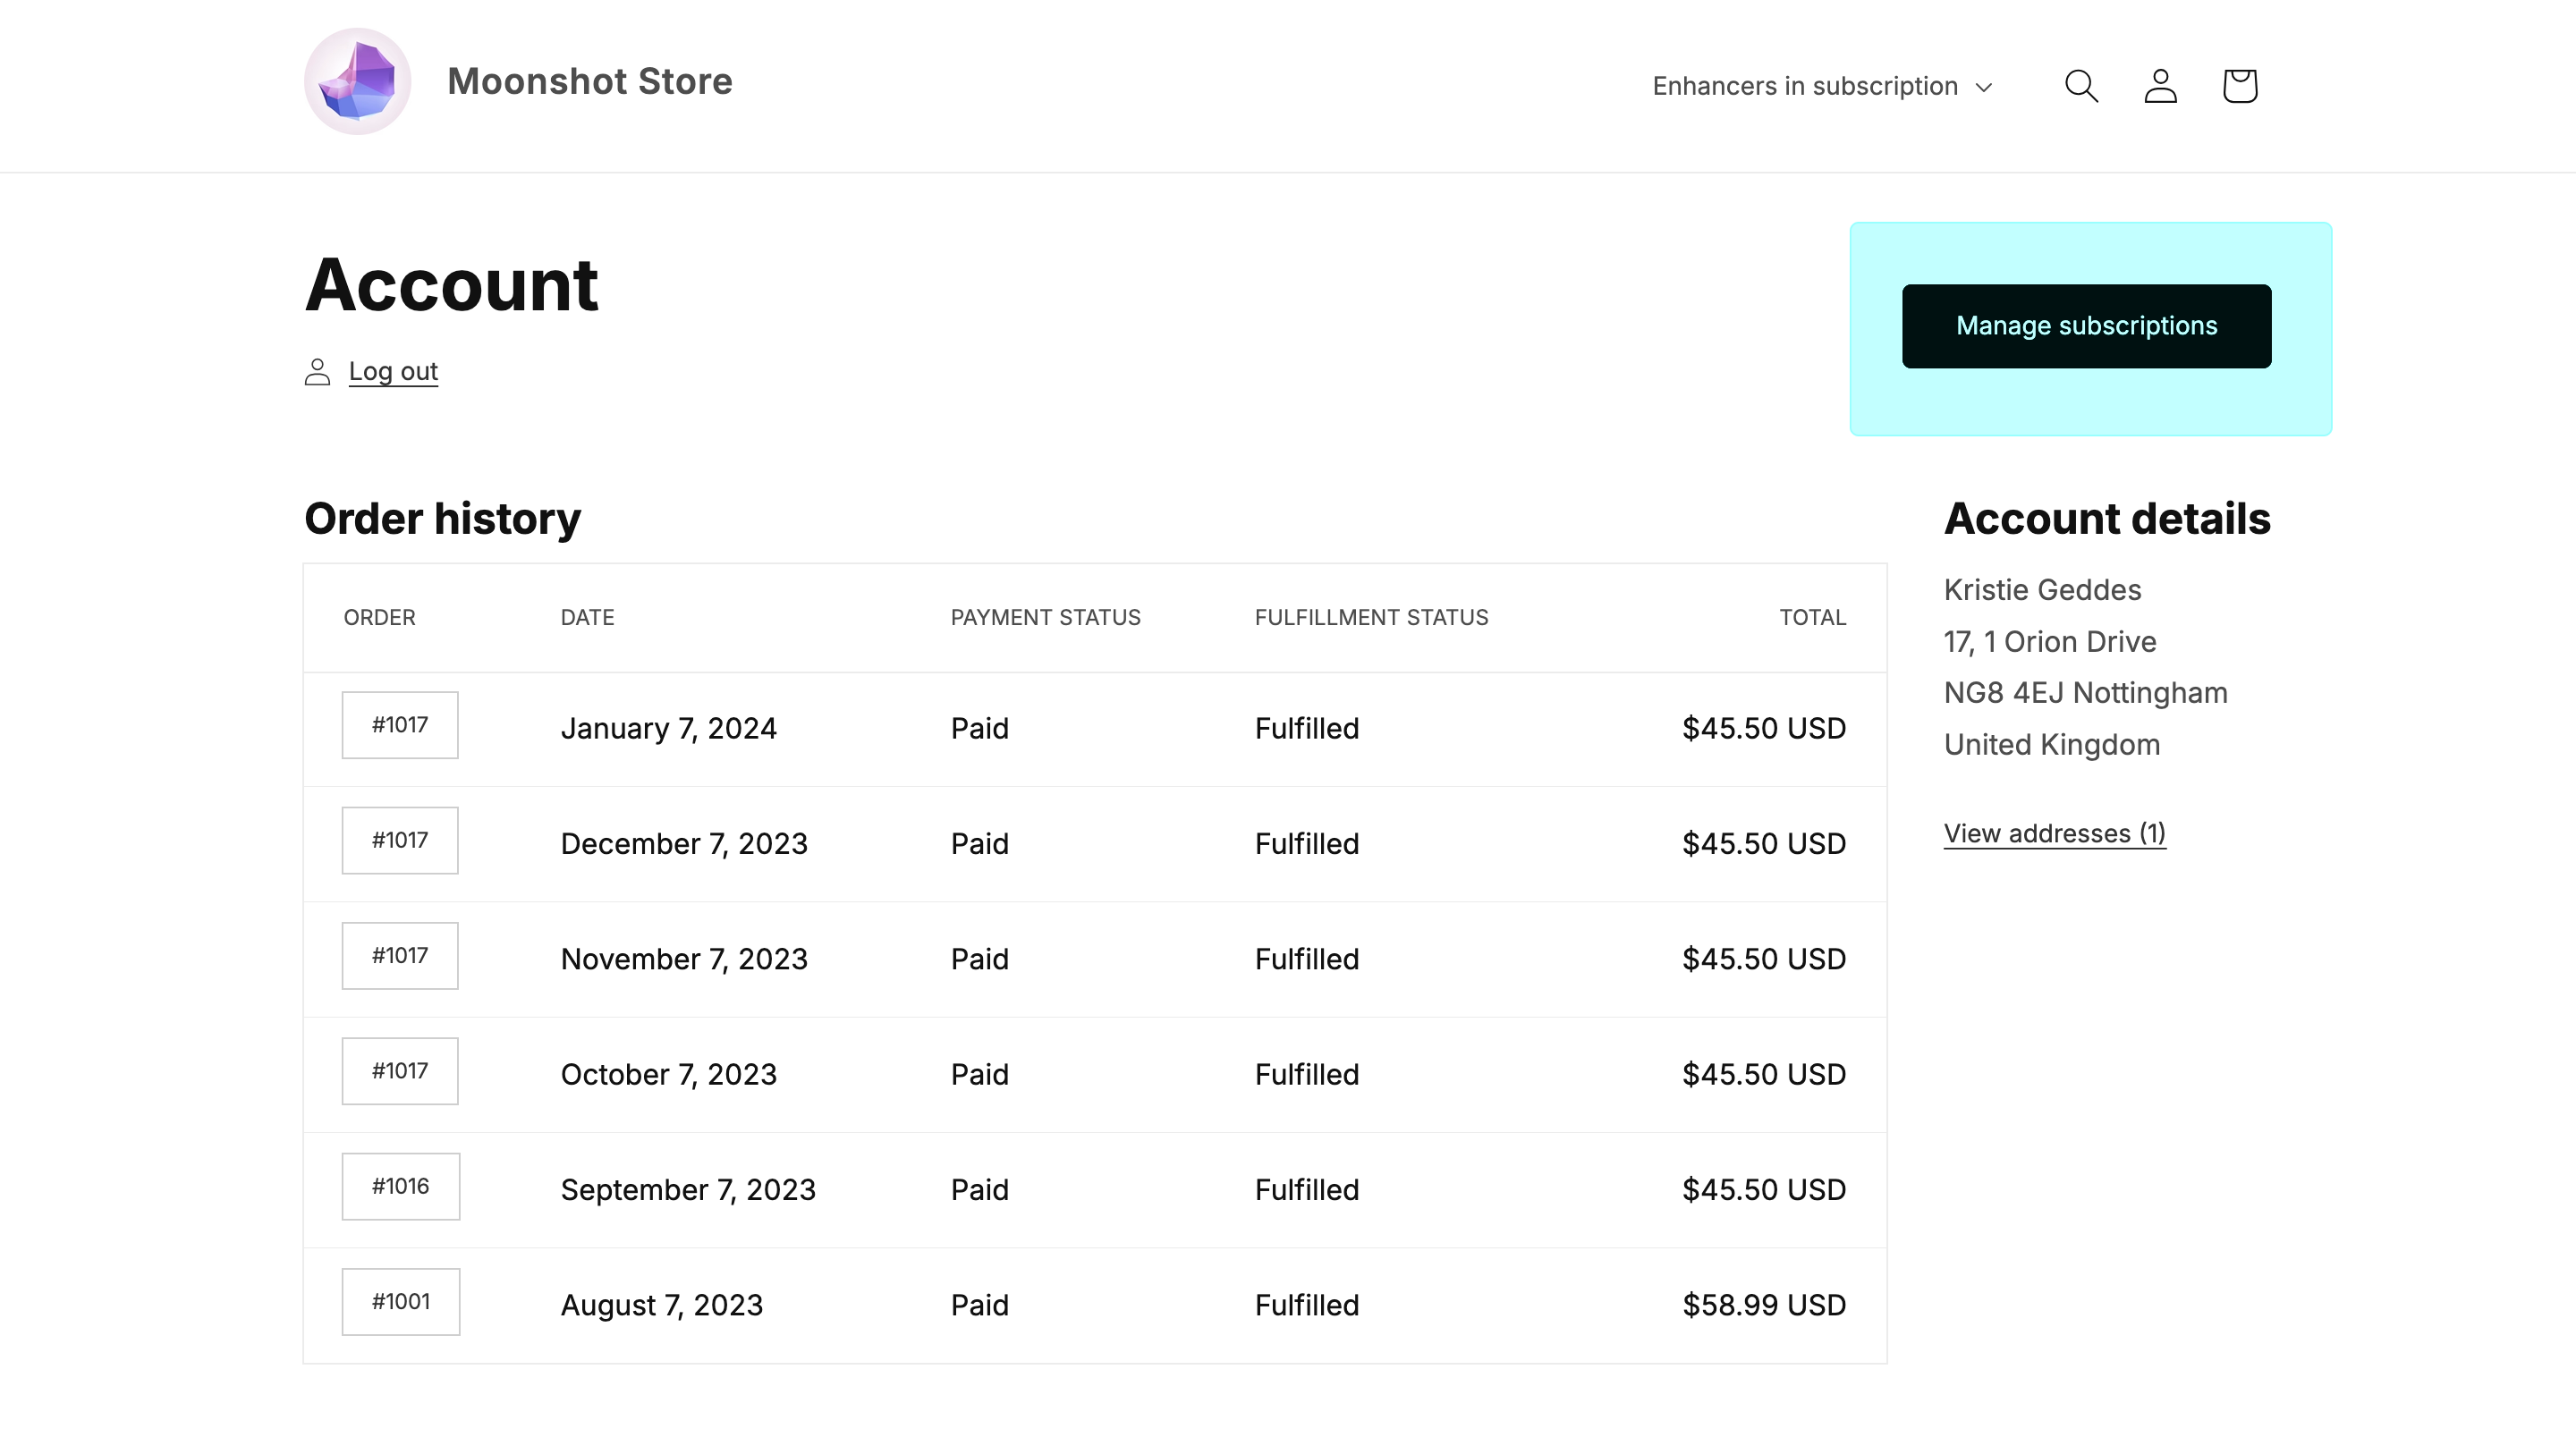 Customer Accout page - Manage subscriptions button